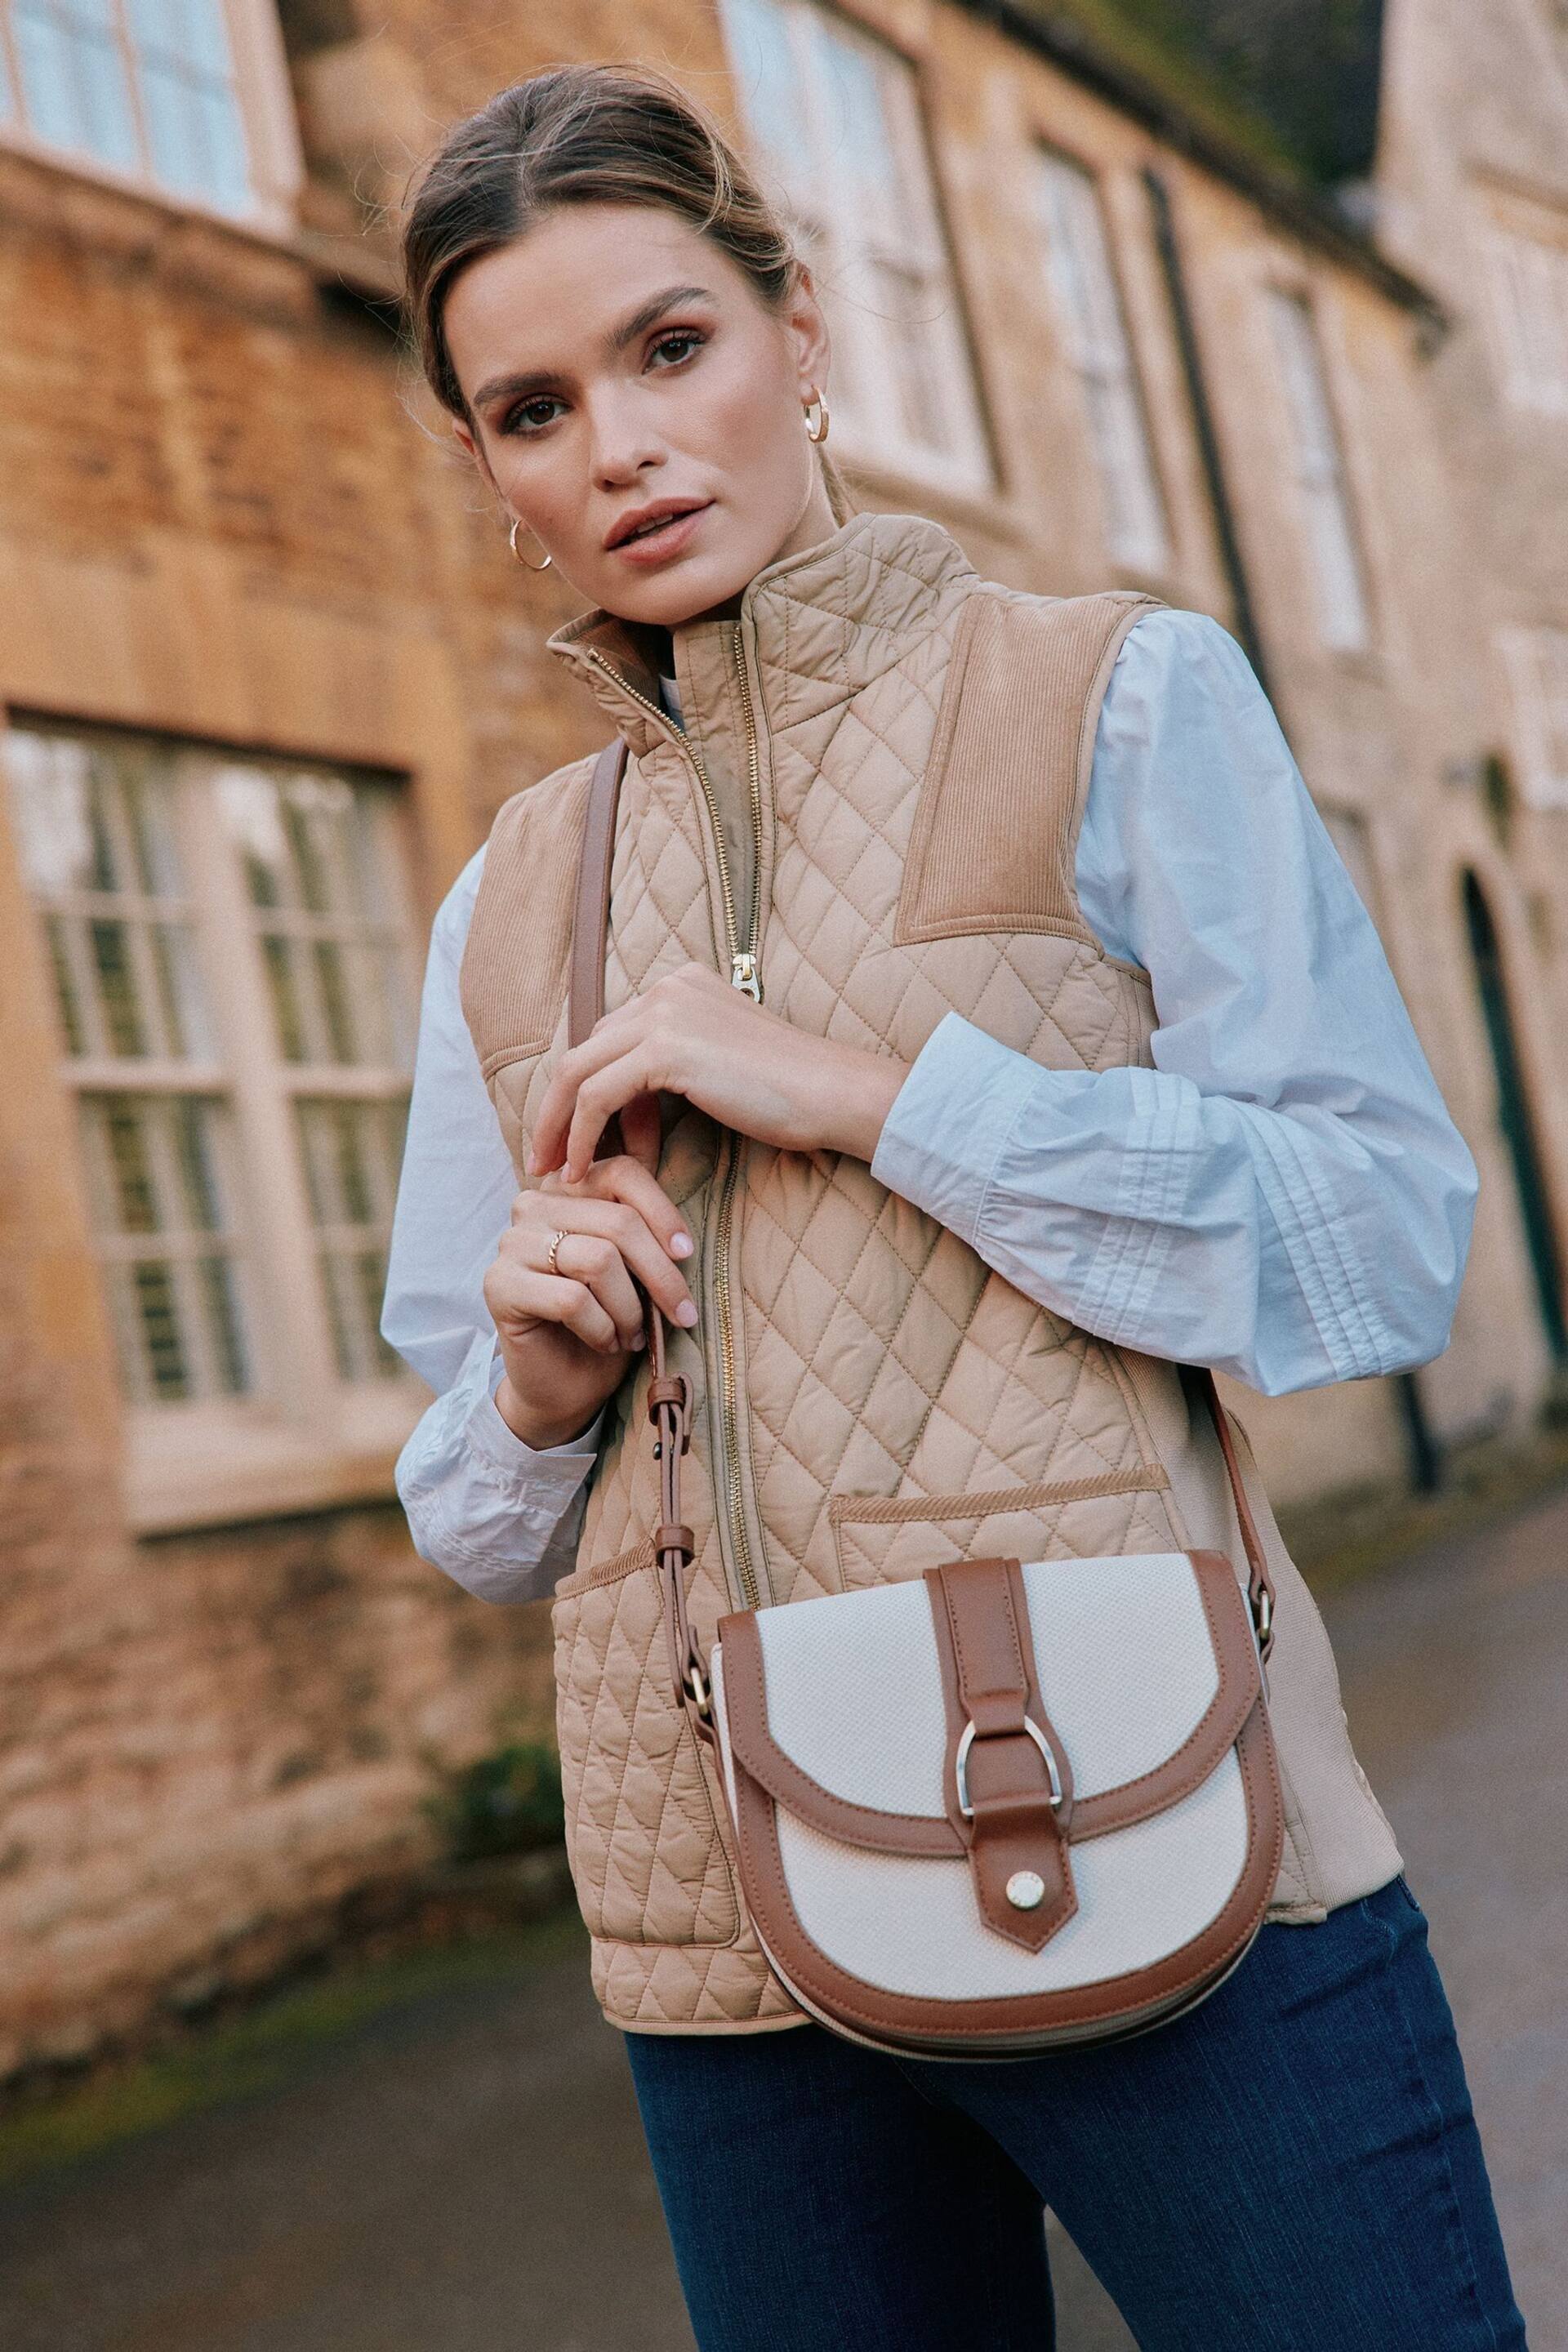 Joules Ludlow Tan Canvas Cross Body Bag - Image 3 of 9